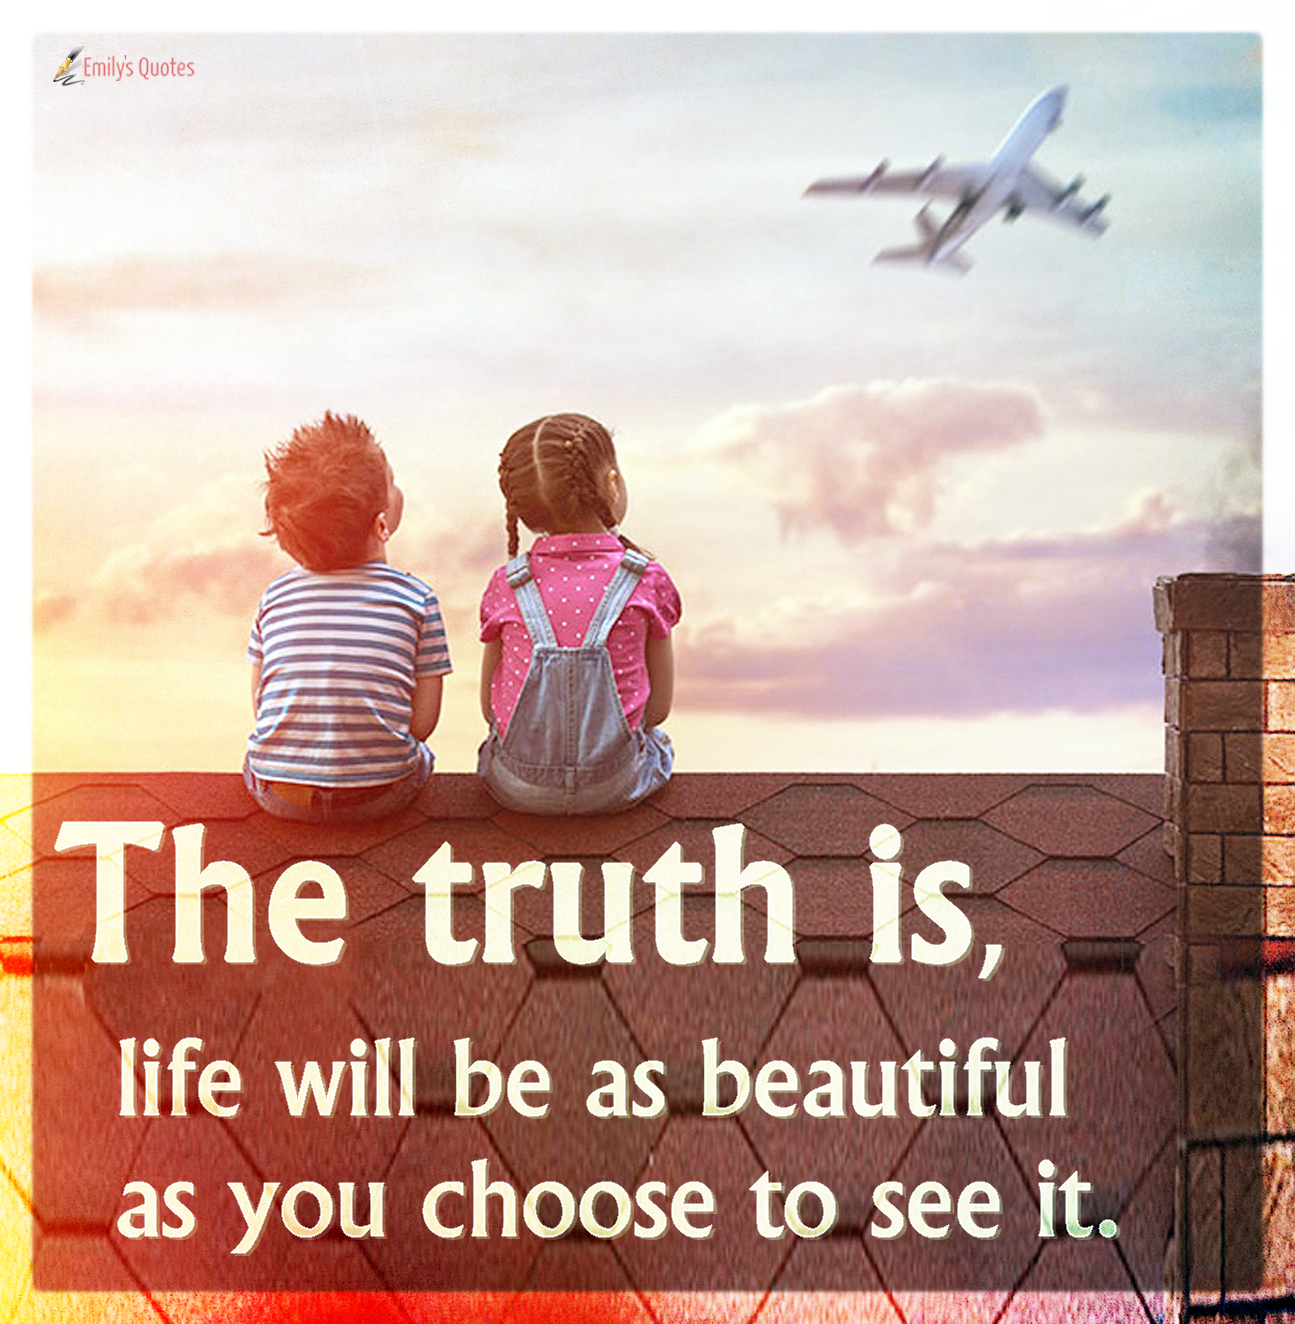 The truth is, life will be as beautiful as you choose to see it